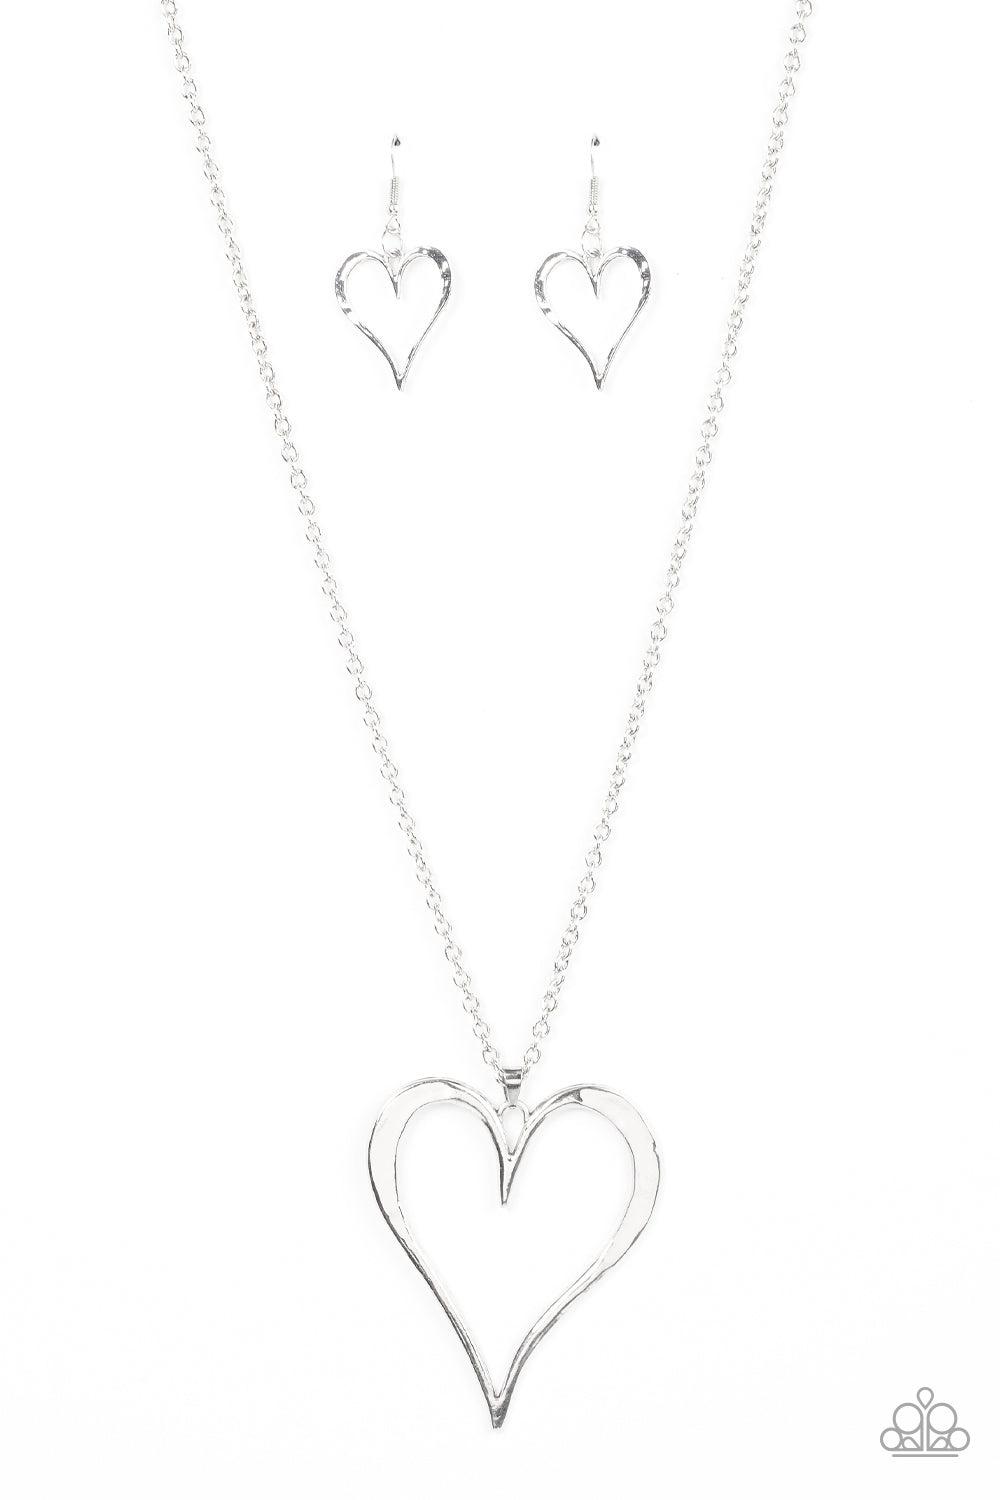 Hopelessly in Love Silver Heart Necklace - Paparazzi Accessories- lightbox - CarasShop.com - $5 Jewelry by Cara Jewels